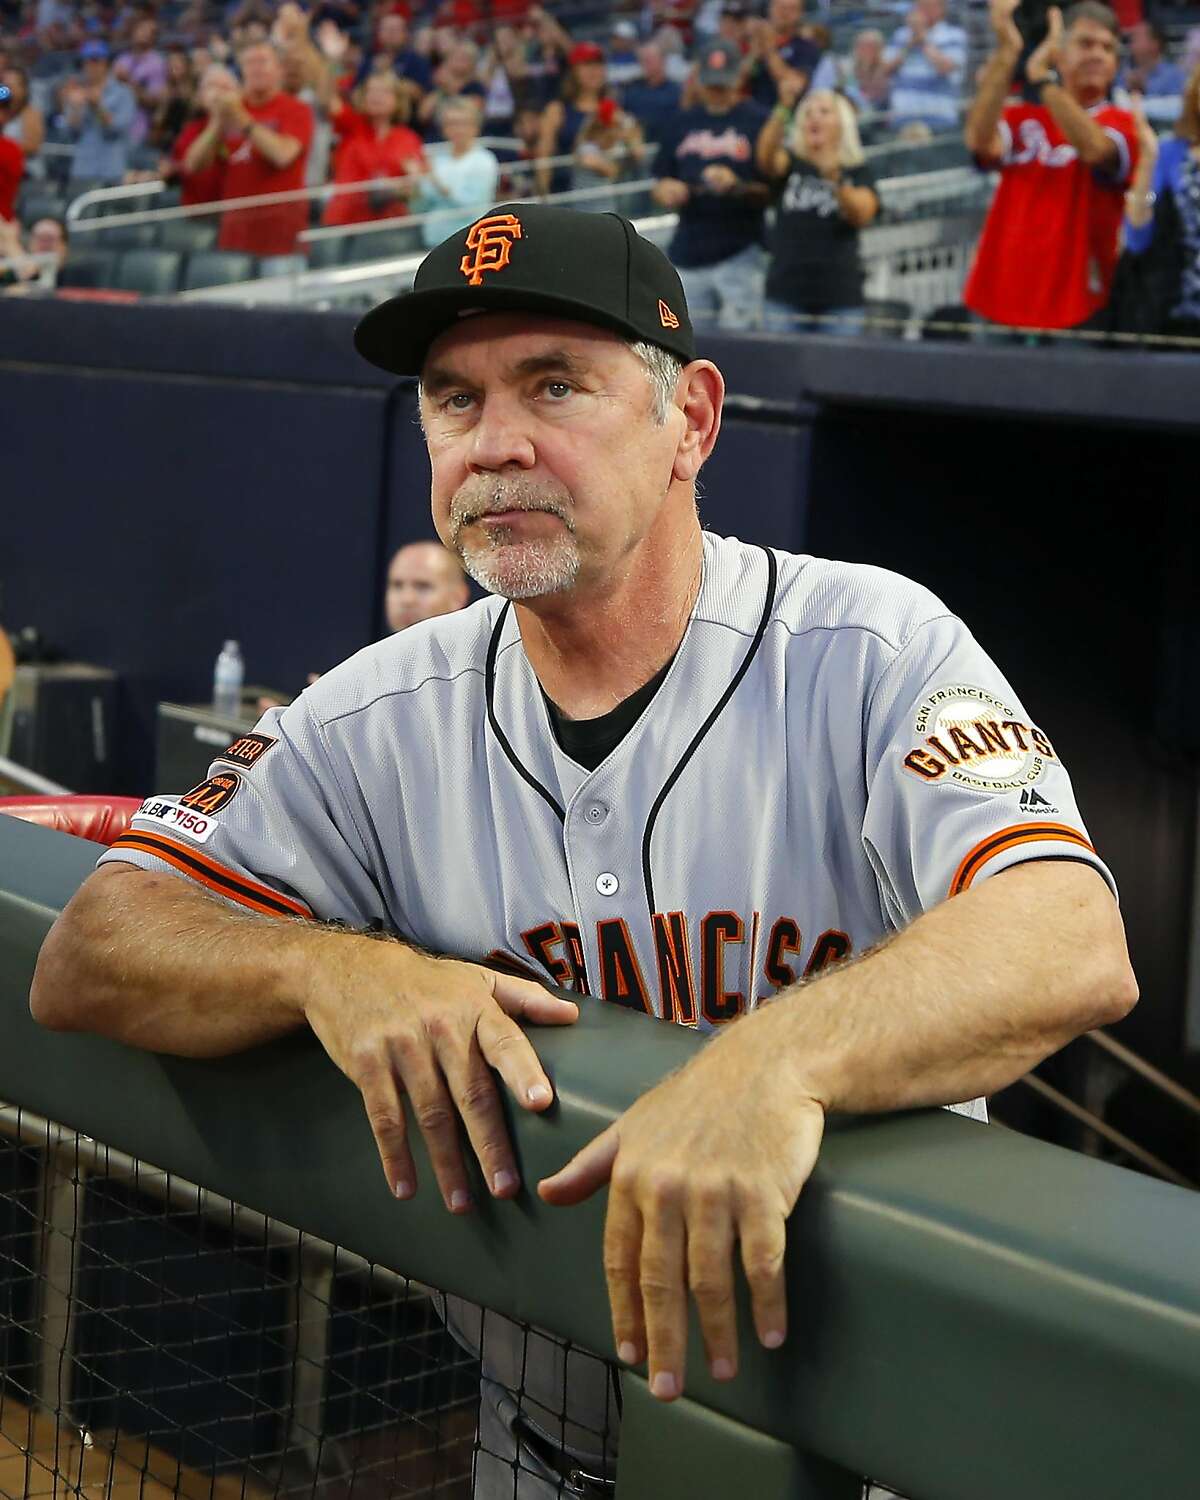 Bruce Bochy not closing the door on managing the Padres - Gaslamp Ball